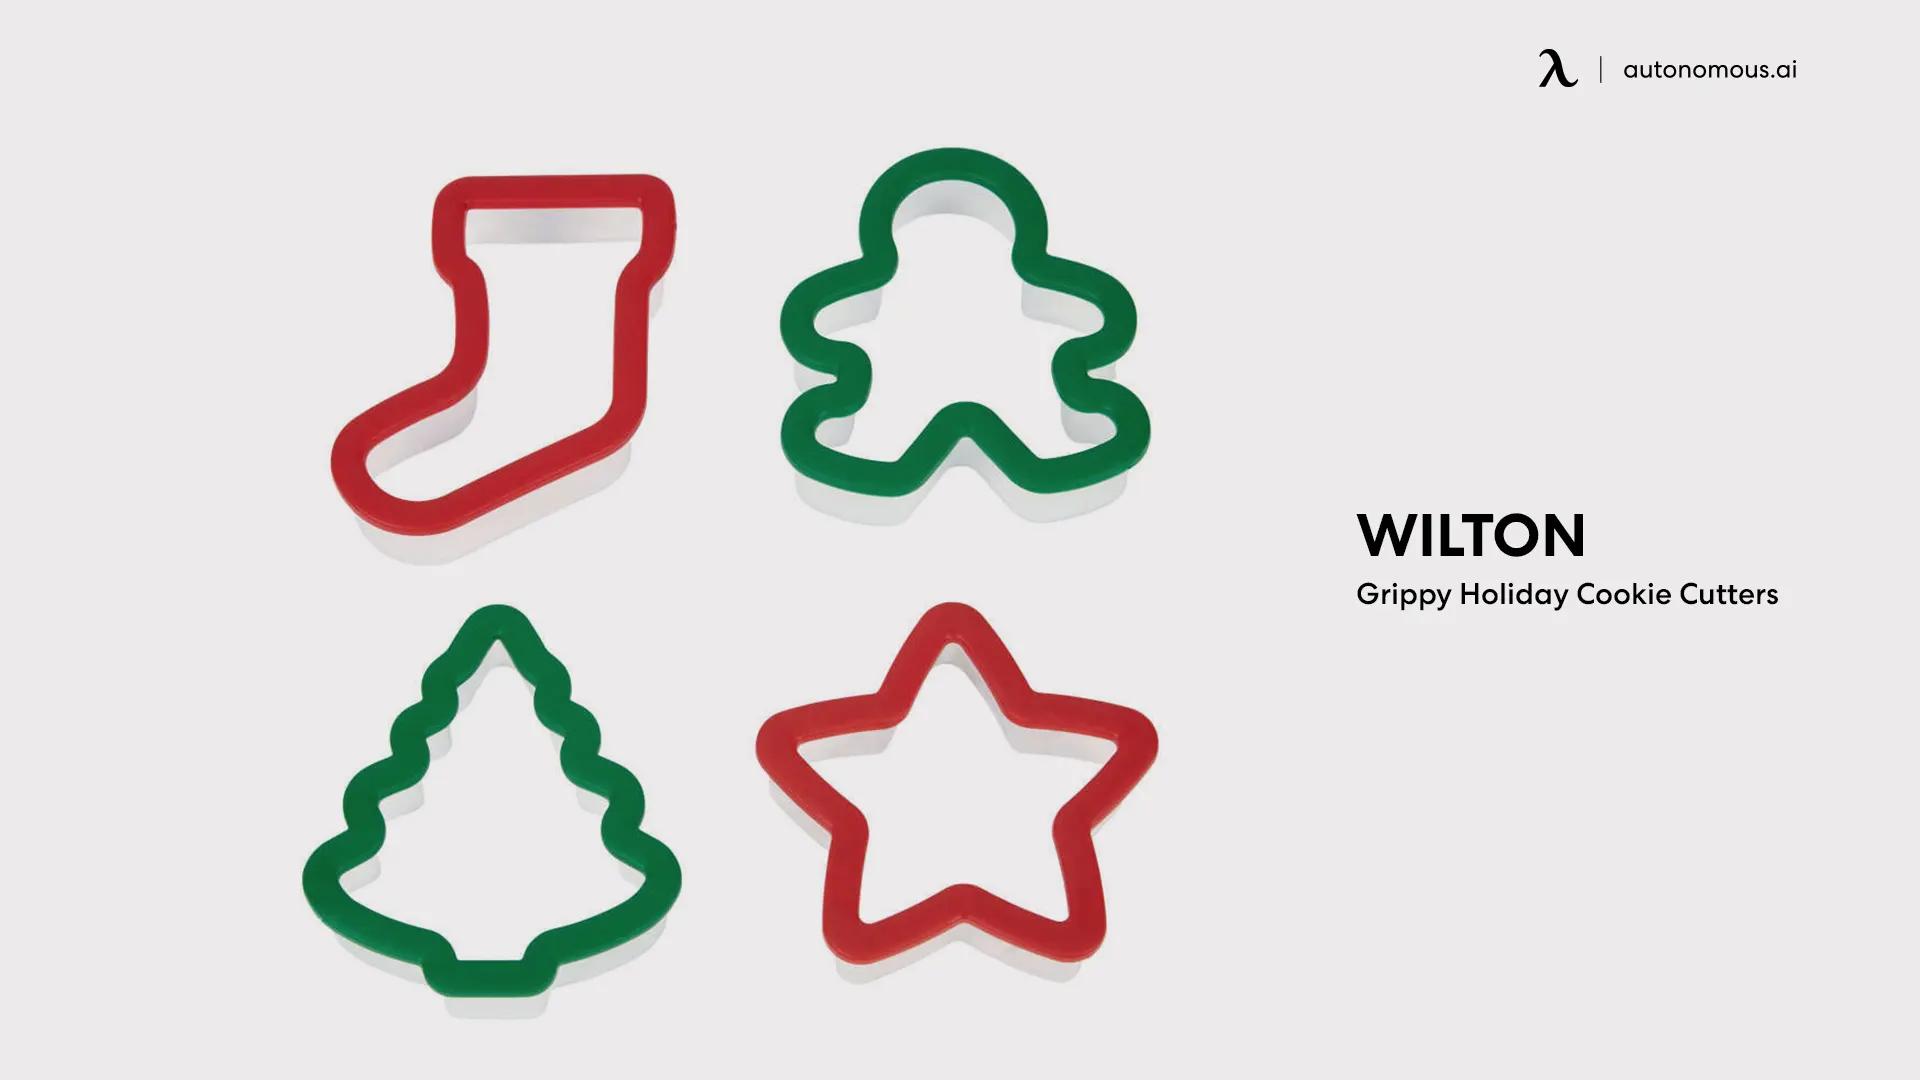 Wilton Grippy Holiday Cookie Cutters